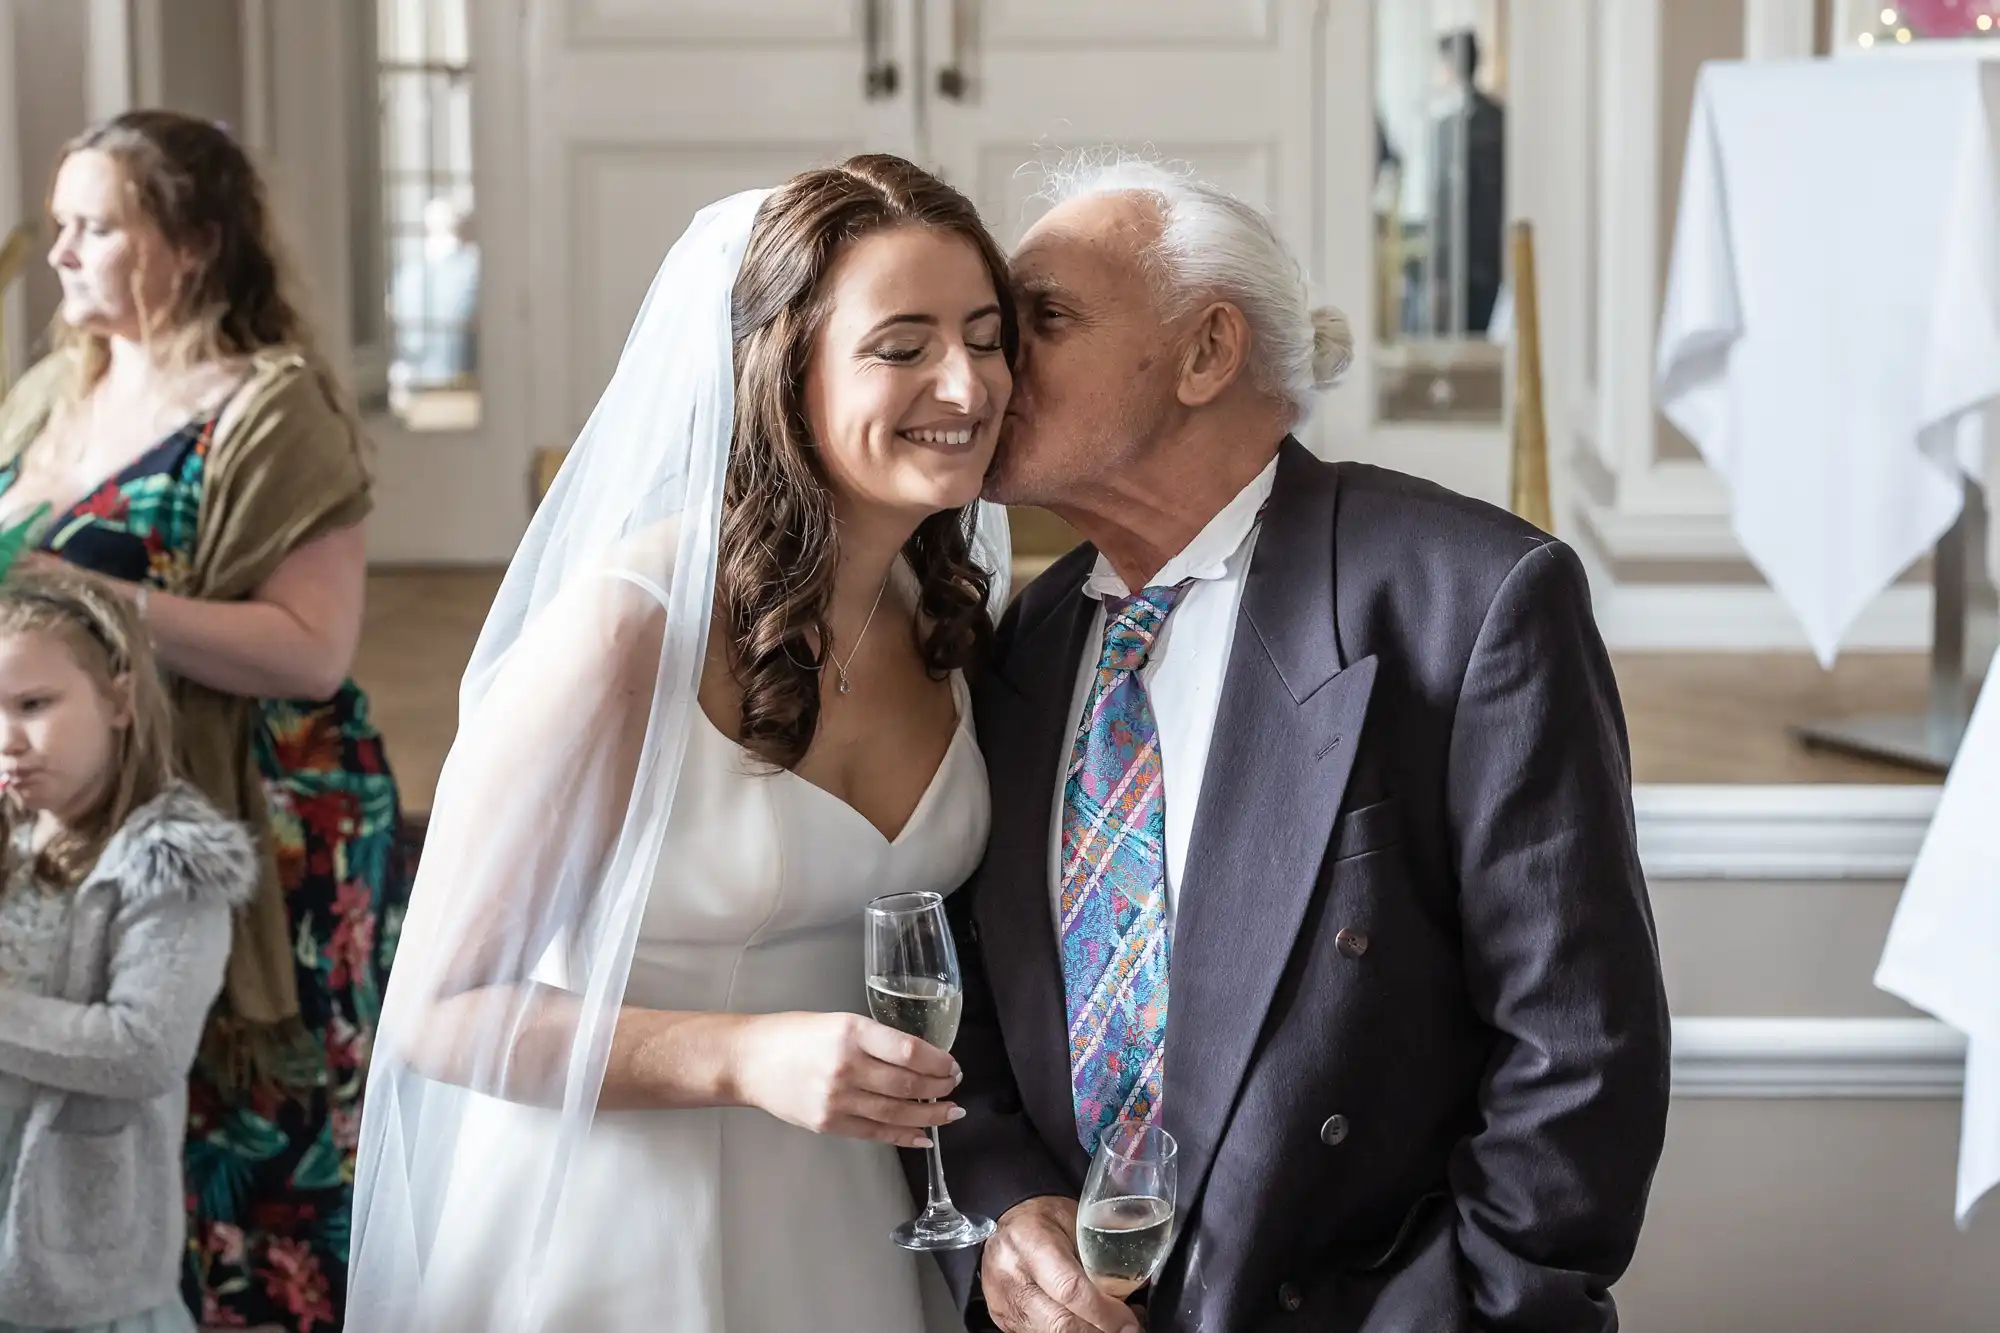 A bride in a white dress smiles as an elderly man kisses her cheek at a wedding reception, both holding champagne glasses.